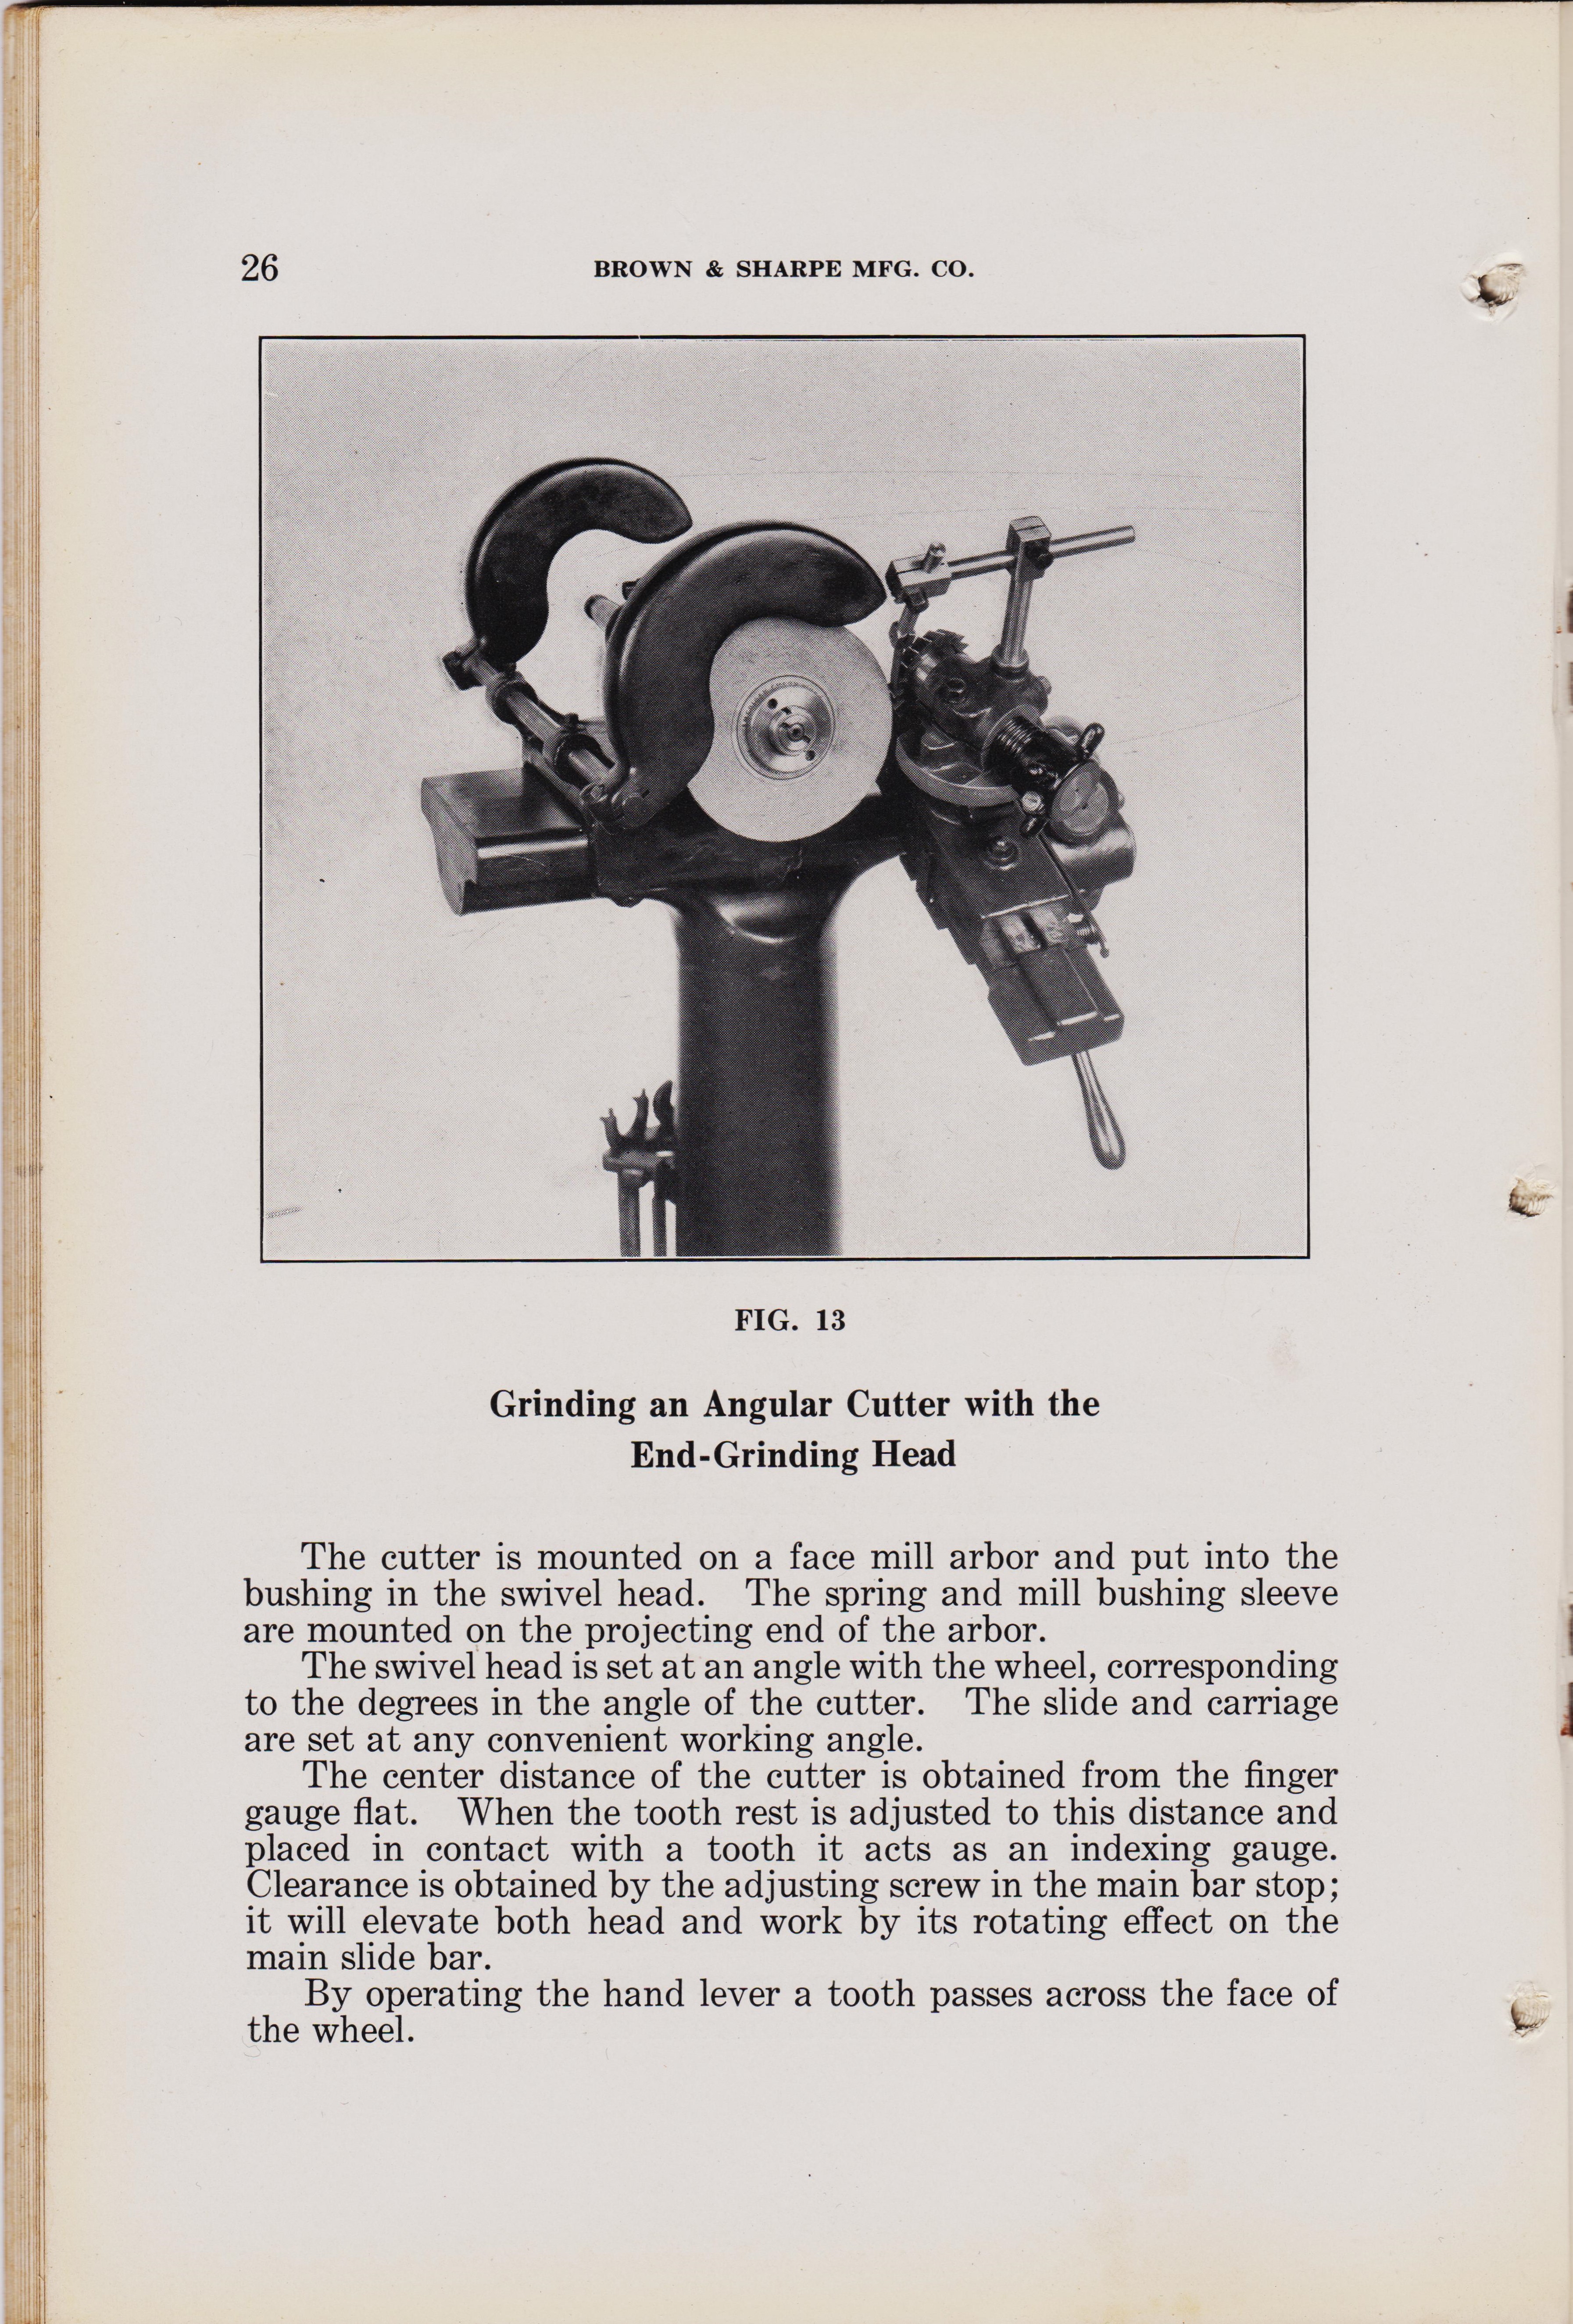 https://antiquemachinery.com/images-2021/Universal-Cutter-and-Reamer-Grinder-Machine-Brown-and-Sharpe-Mfg-Co-1929-No2-pg-26-Grinding-sharpening-a-Angular-cutter.jpeg